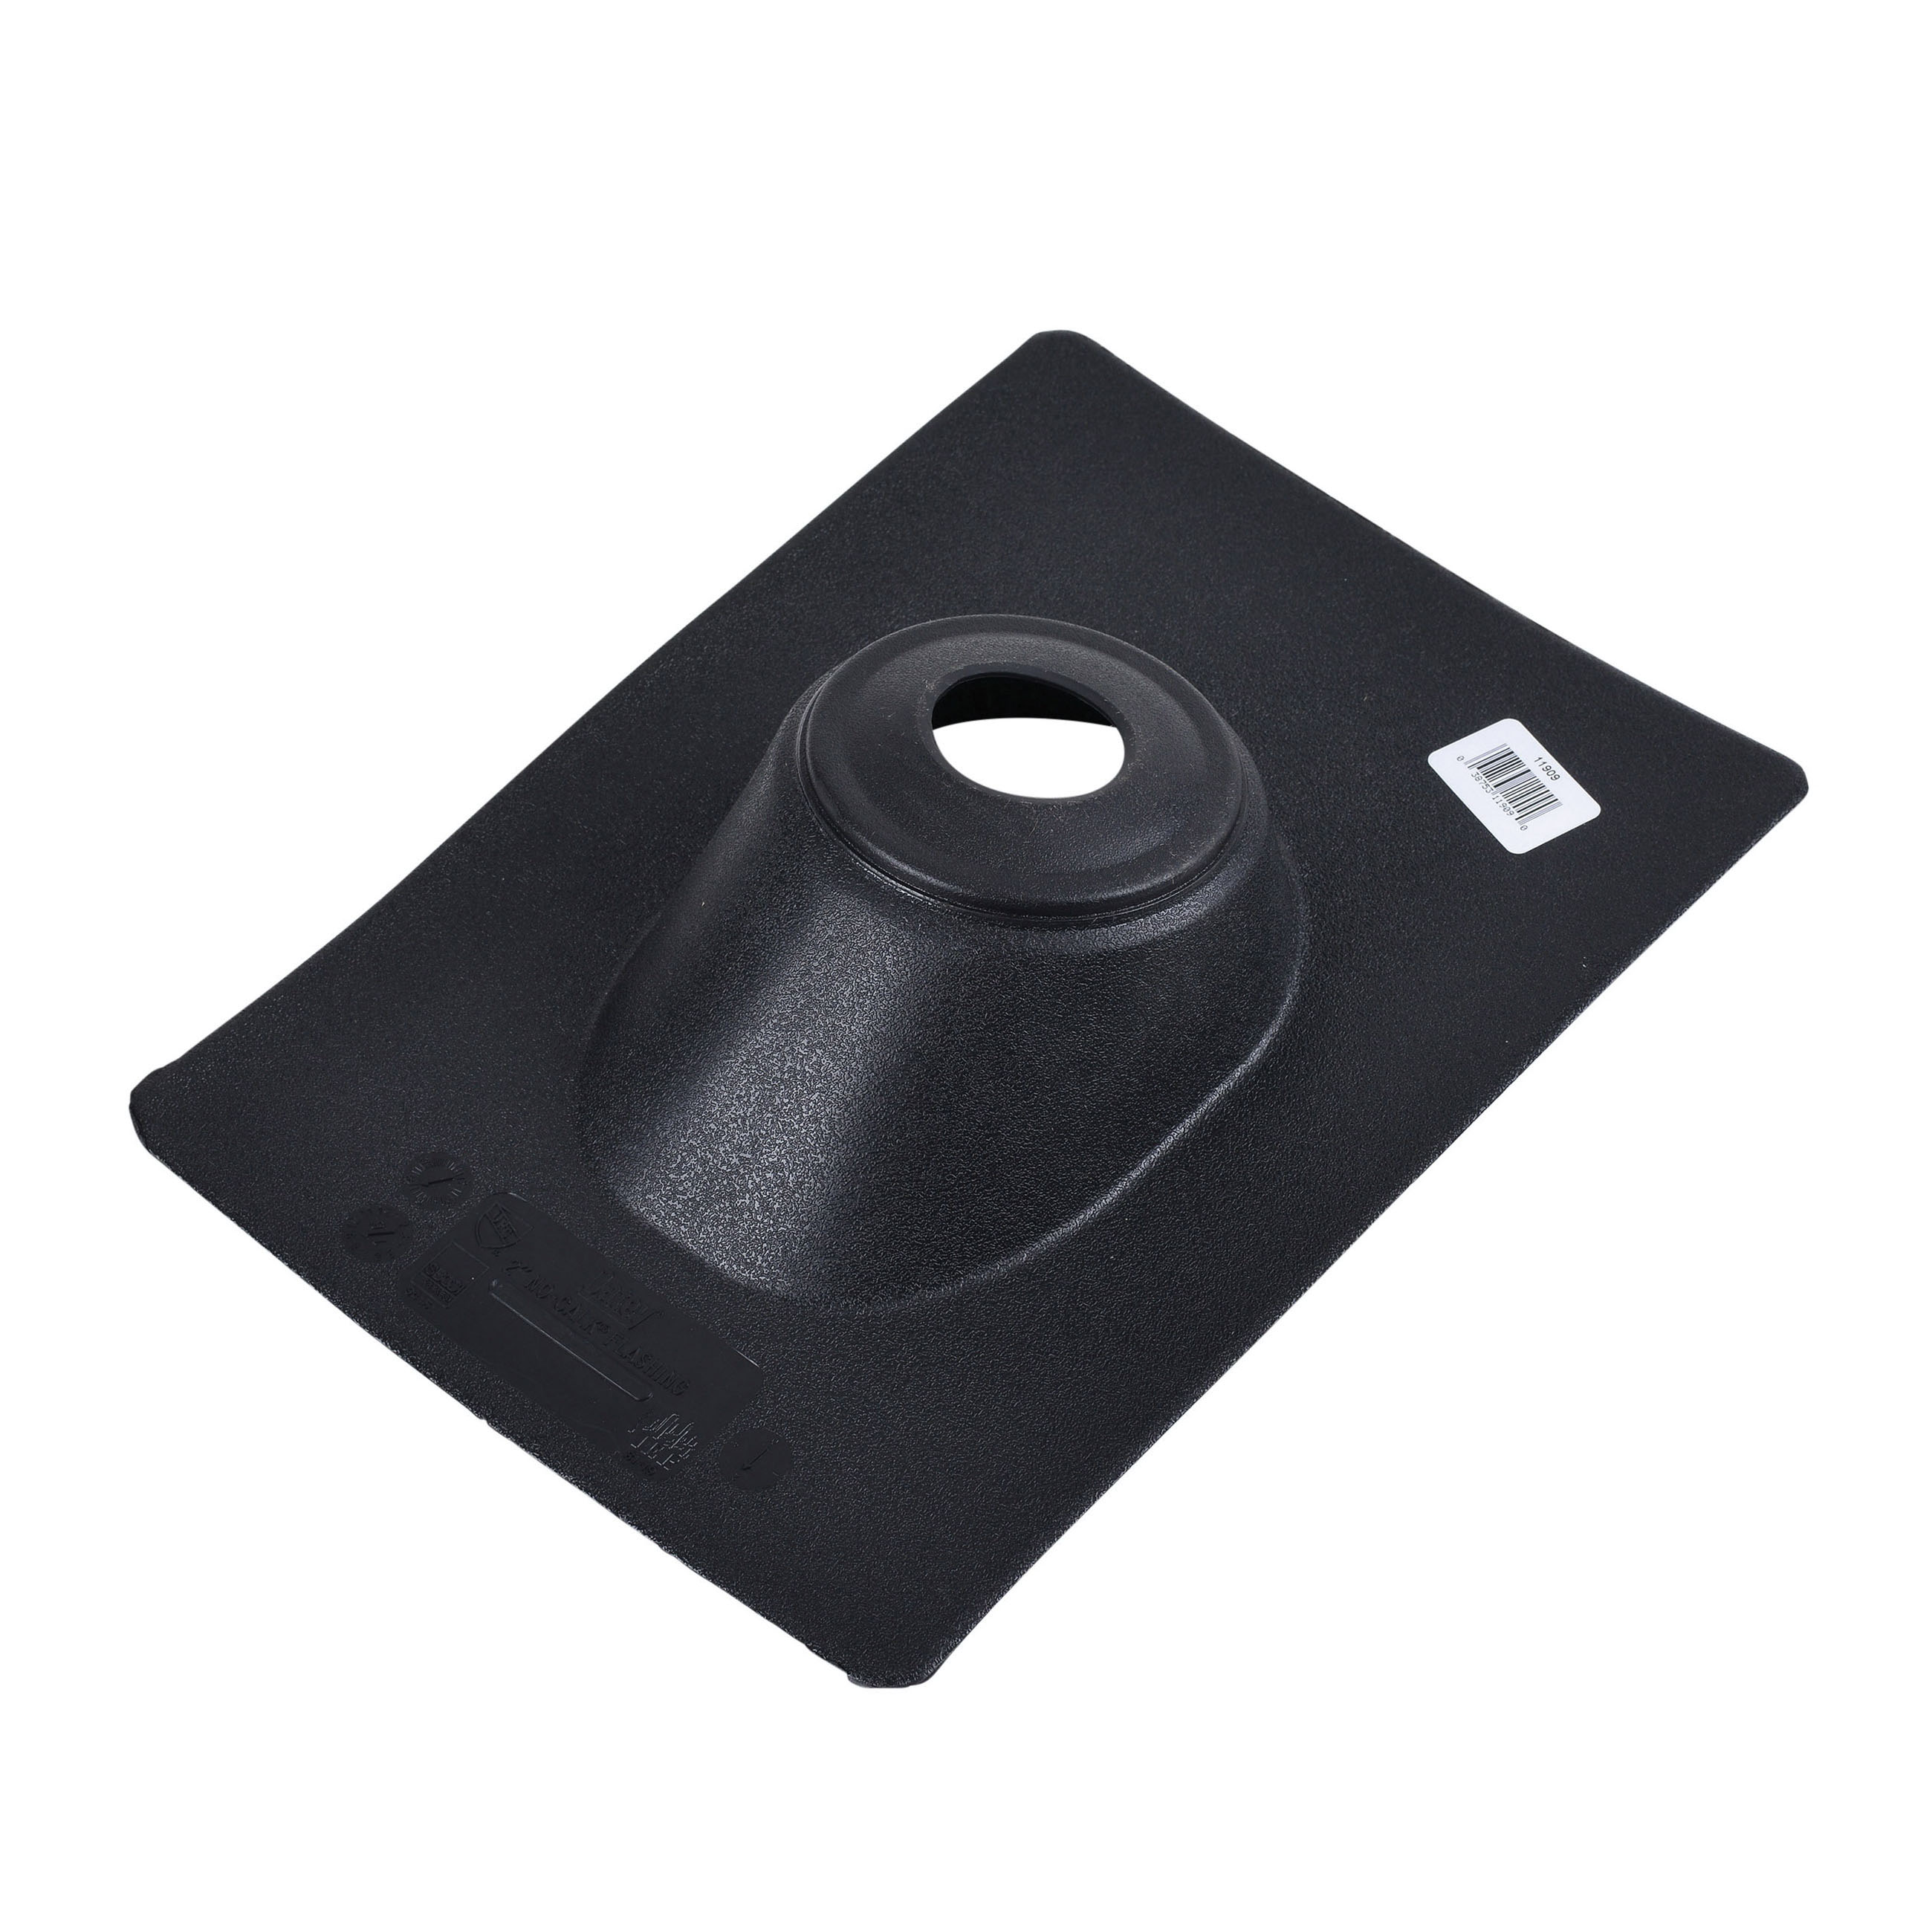 Oatey® No-Calk® 11910 Roof Flashing, 15 in L Base, 11 in W Base, Thermoplastic, Fits Vent Pipe Size: 3 in